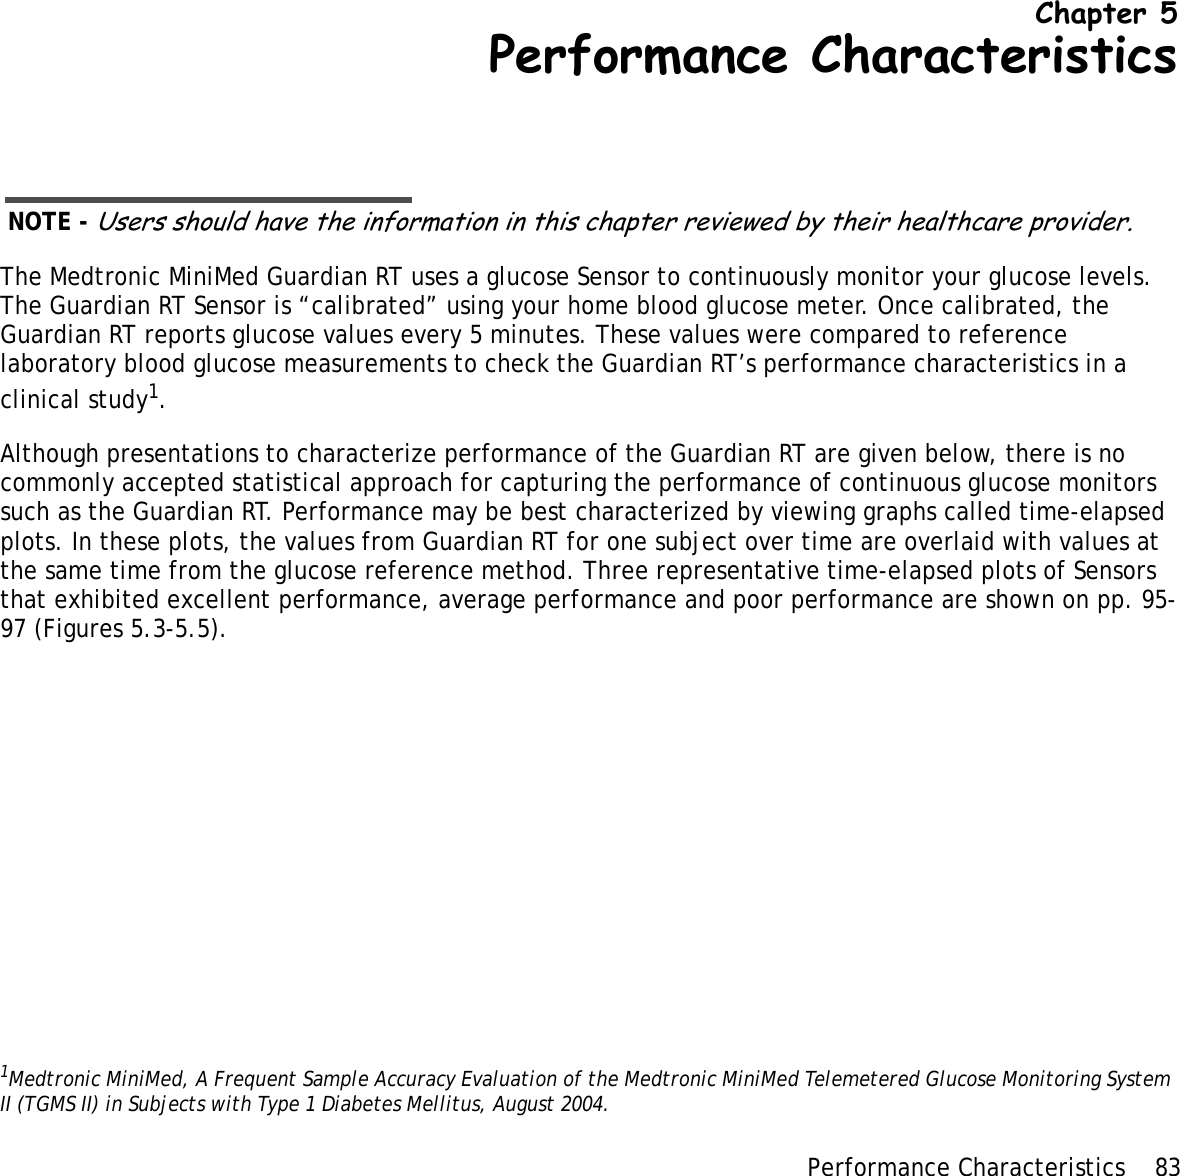 Performance Characteristics 83 Chapter 5Performance CharacteristicsNOTE - Users should have the information in this chapter reviewed by their healthcare provider.The Medtronic MiniMed Guardian RT uses a glucose Sensor to continuously monitor your glucose levels. The Guardian RT Sensor is “calibrated” using your home blood glucose meter. Once calibrated, the Guardian RT reports glucose values every 5 minutes. These values were compared to reference laboratory blood glucose measurements to check the Guardian RT’s performance characteristics in a clinical study1.Although presentations to characterize performance of the Guardian RT are given below, there is no commonly accepted statistical approach for capturing the performance of continuous glucose monitors such as the Guardian RT. Performance may be best characterized by viewing graphs called time-elapsed plots. In these plots, the values from Guardian RT for one subject over time are overlaid with values at the same time from the glucose reference method. Three representative time-elapsed plots of Sensors that exhibited excellent performance, average performance and poor performance are shown on pp. 95-97 (Figures 5.3-5.5).1Medtronic MiniMed, A Frequent Sample Accuracy Evaluation of the Medtronic MiniMed Telemetered Glucose Monitoring System II (TGMS II) in Subjects with Type 1 Diabetes Mellitus, August 2004.